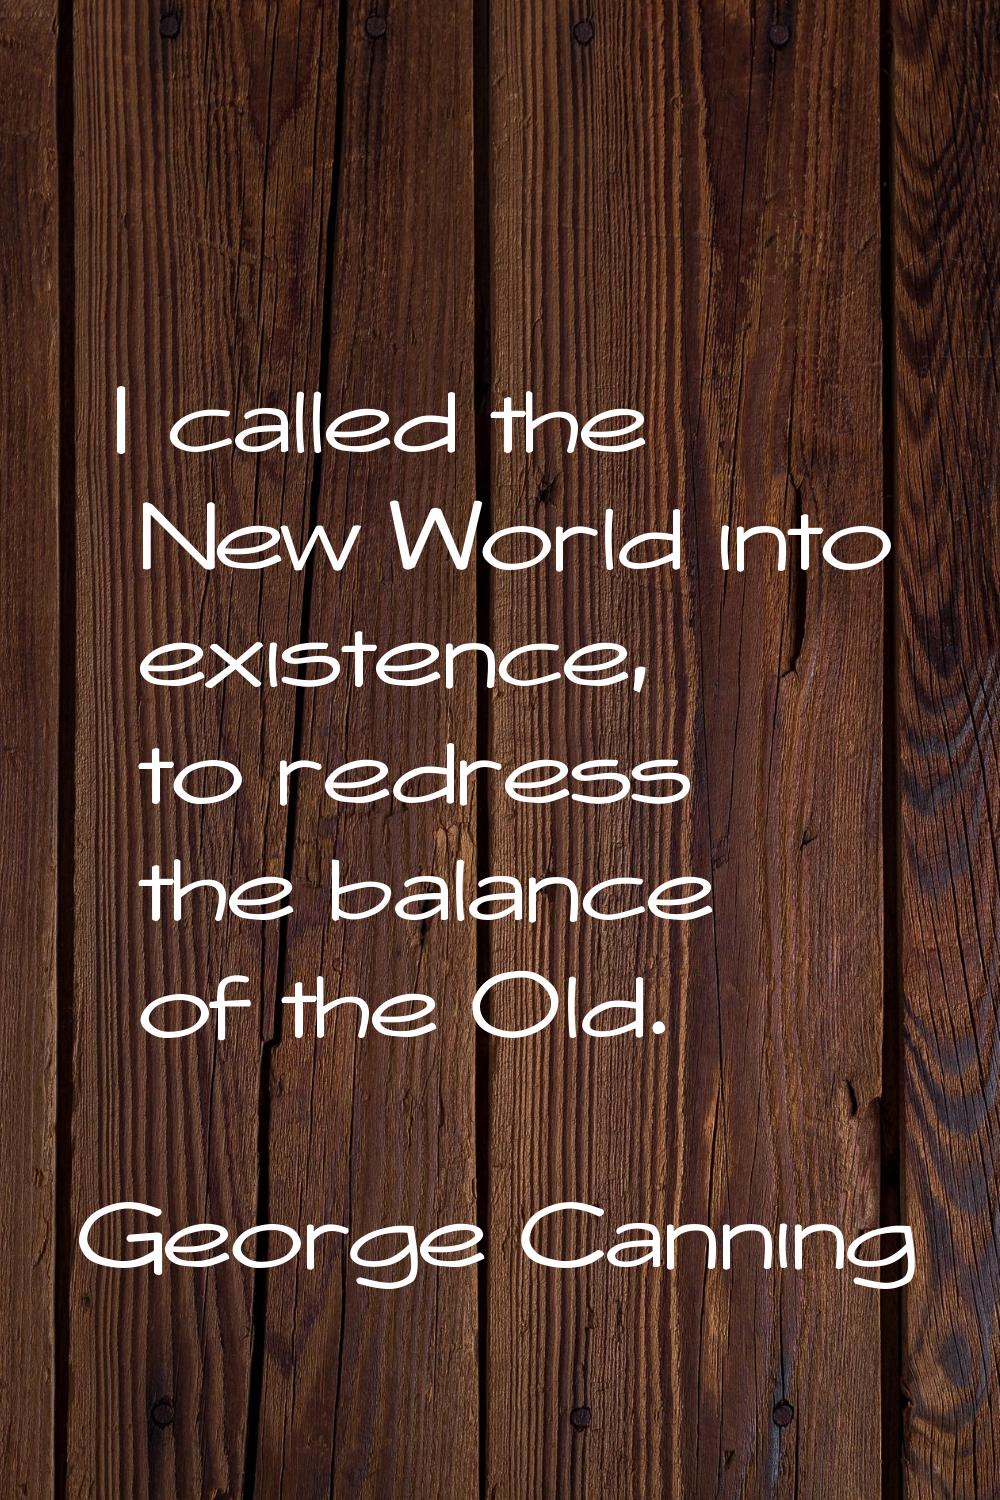 I called the New World into existence, to redress the balance of the Old.